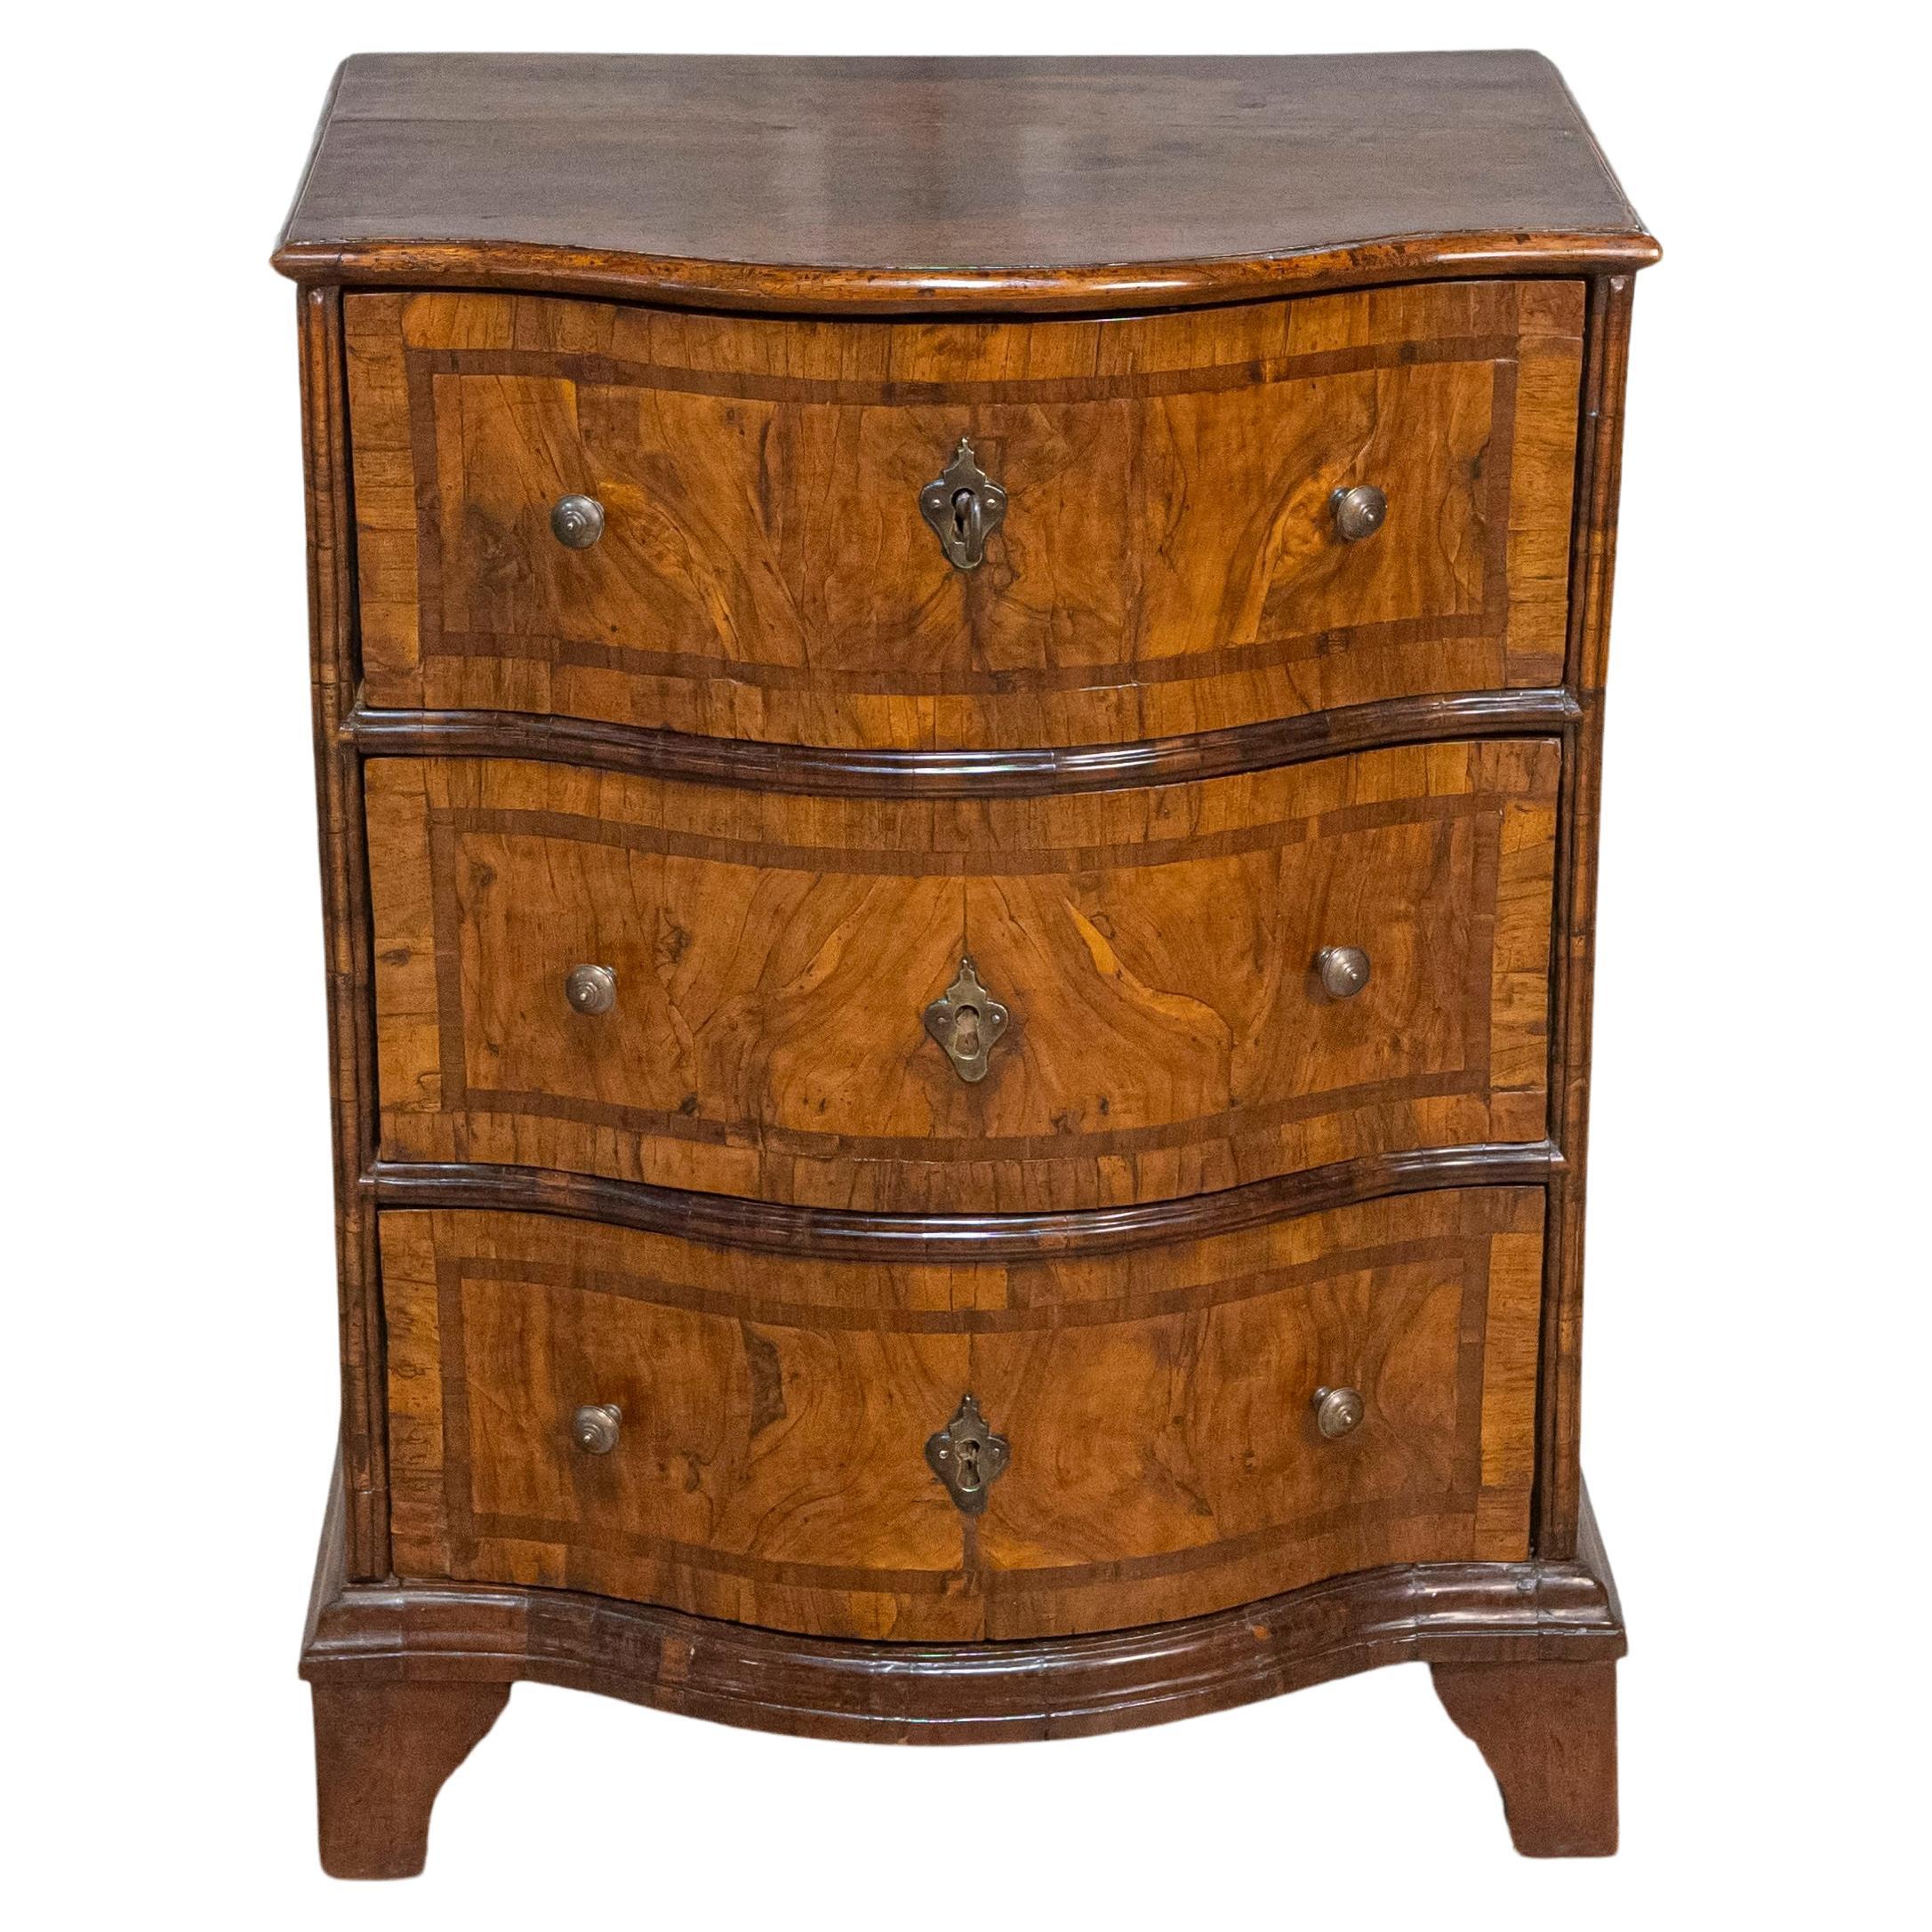 Italian 18th Century Walnut and Mahogany Three-Drawer, Serpentine Front Chest For Sale